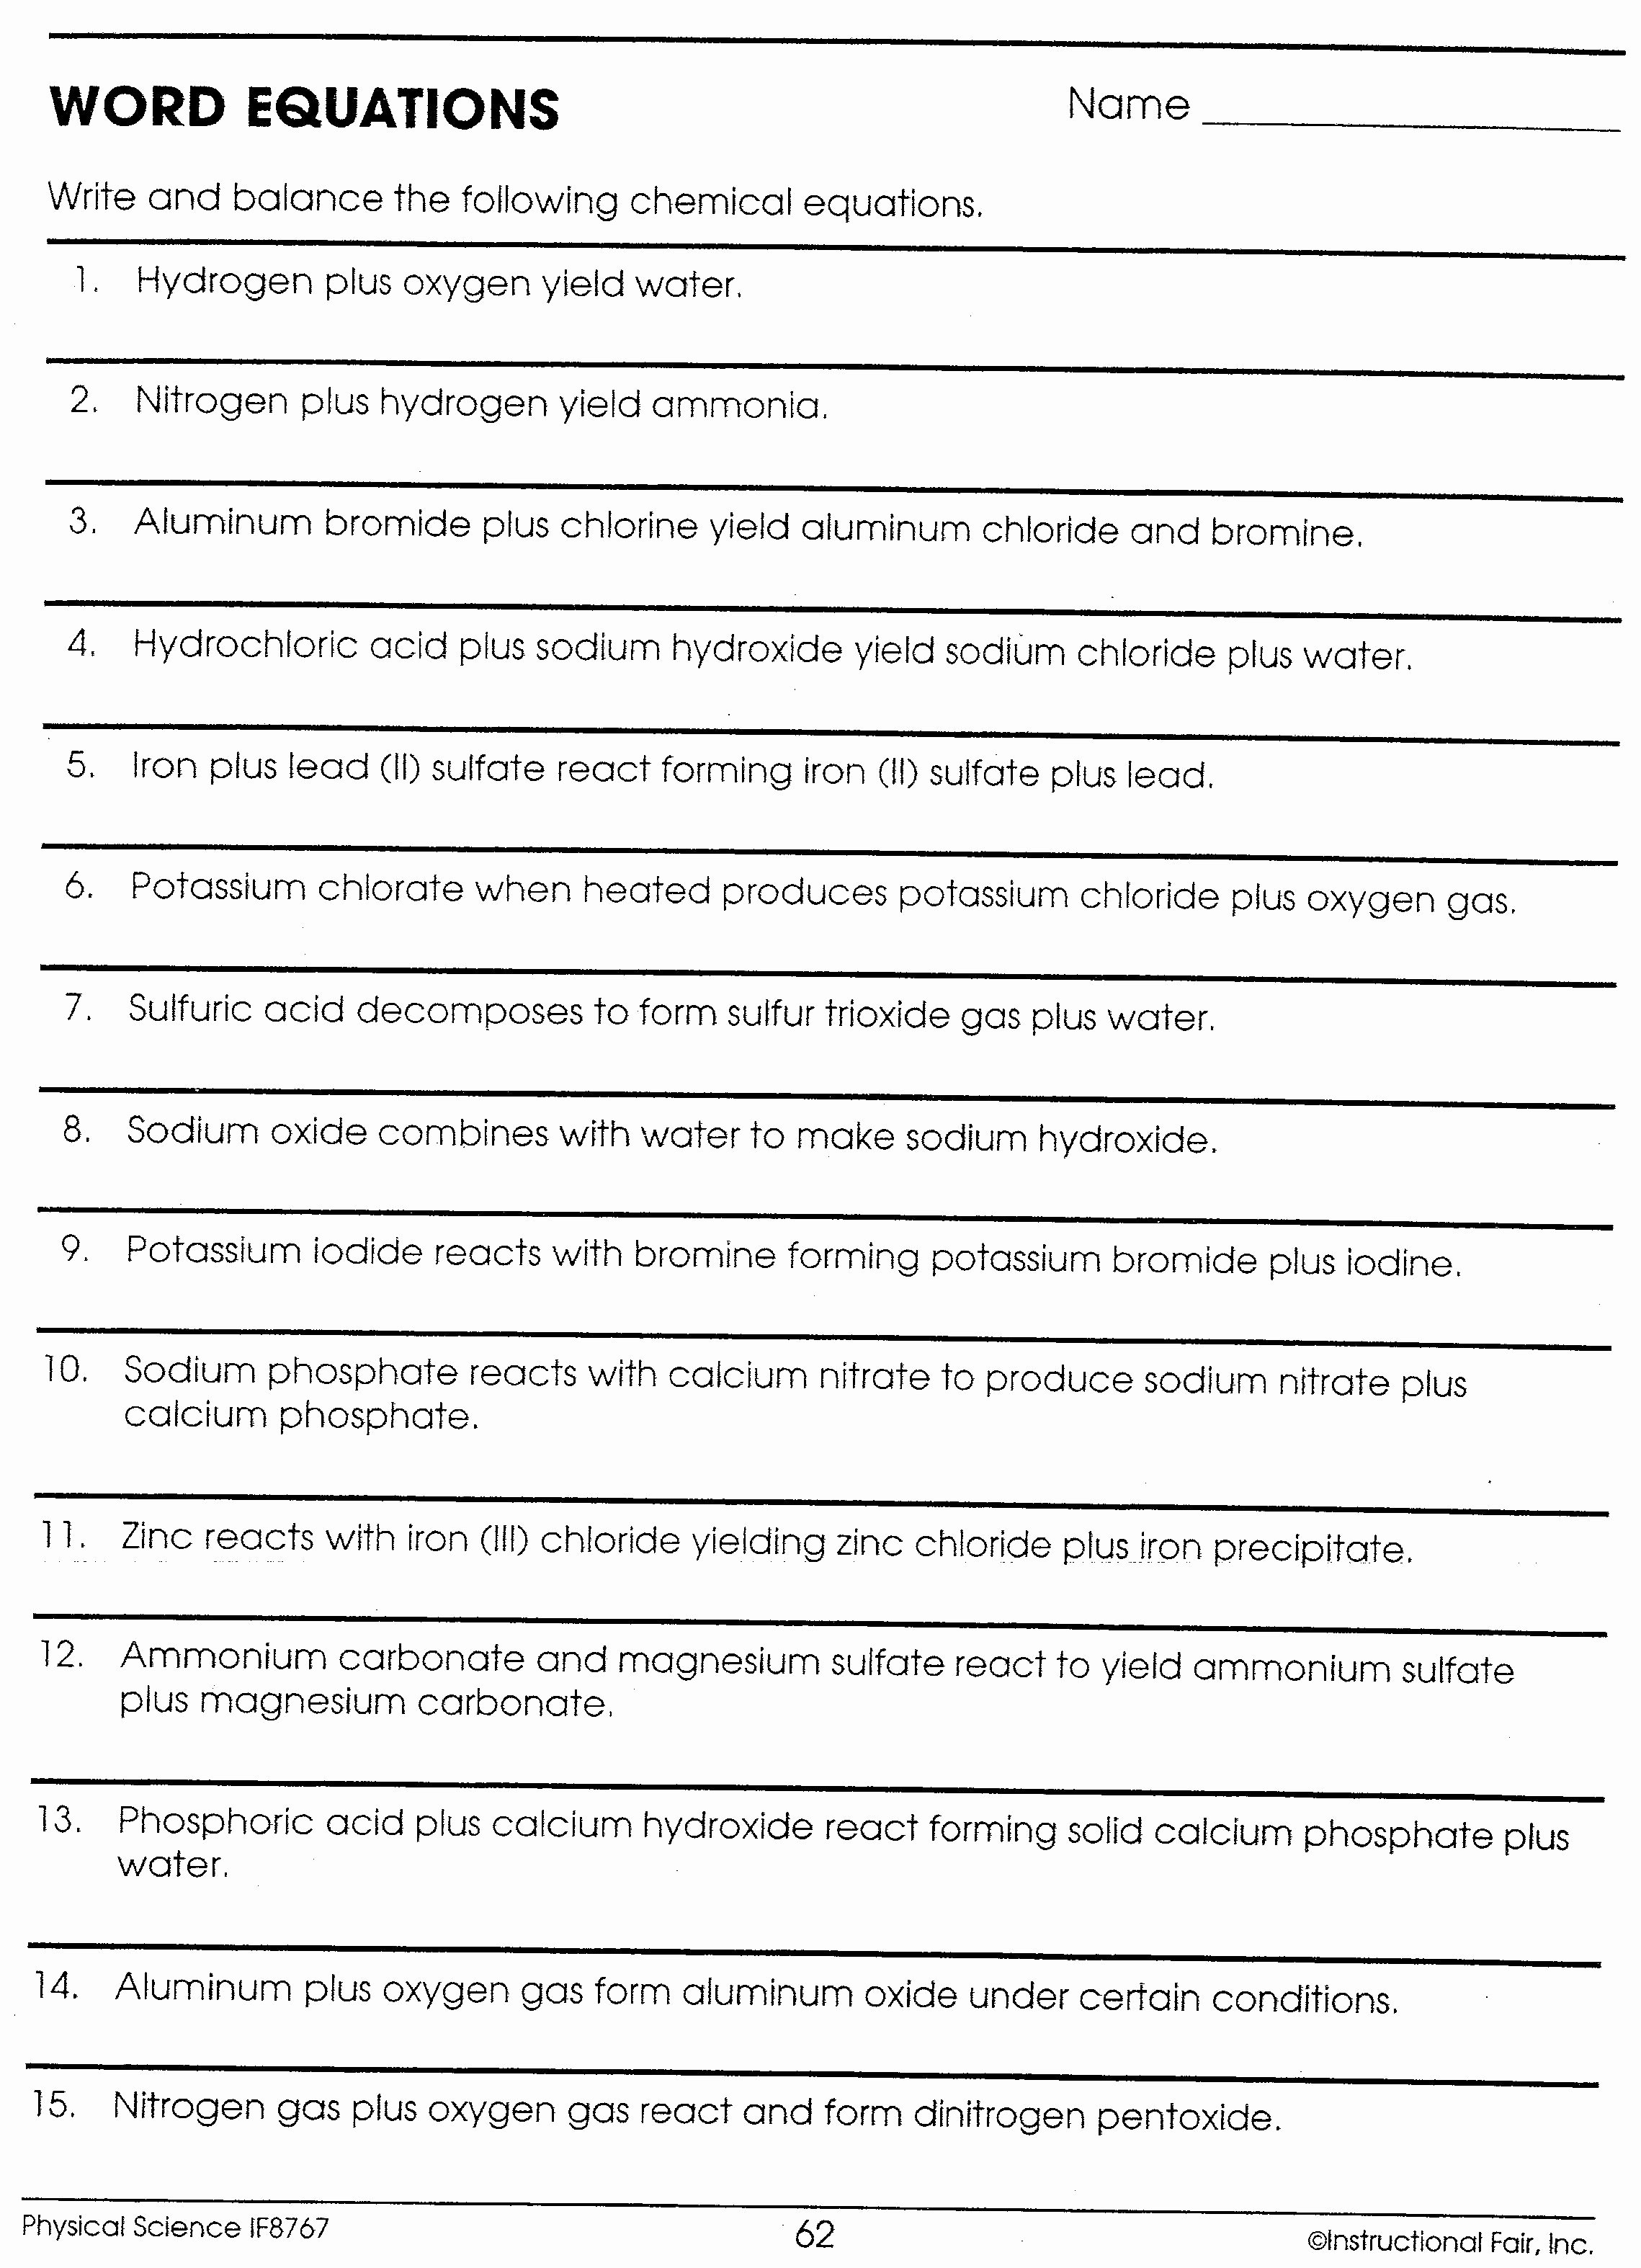 Chemistry Chemical Word Equations Worksheet Answers The Best